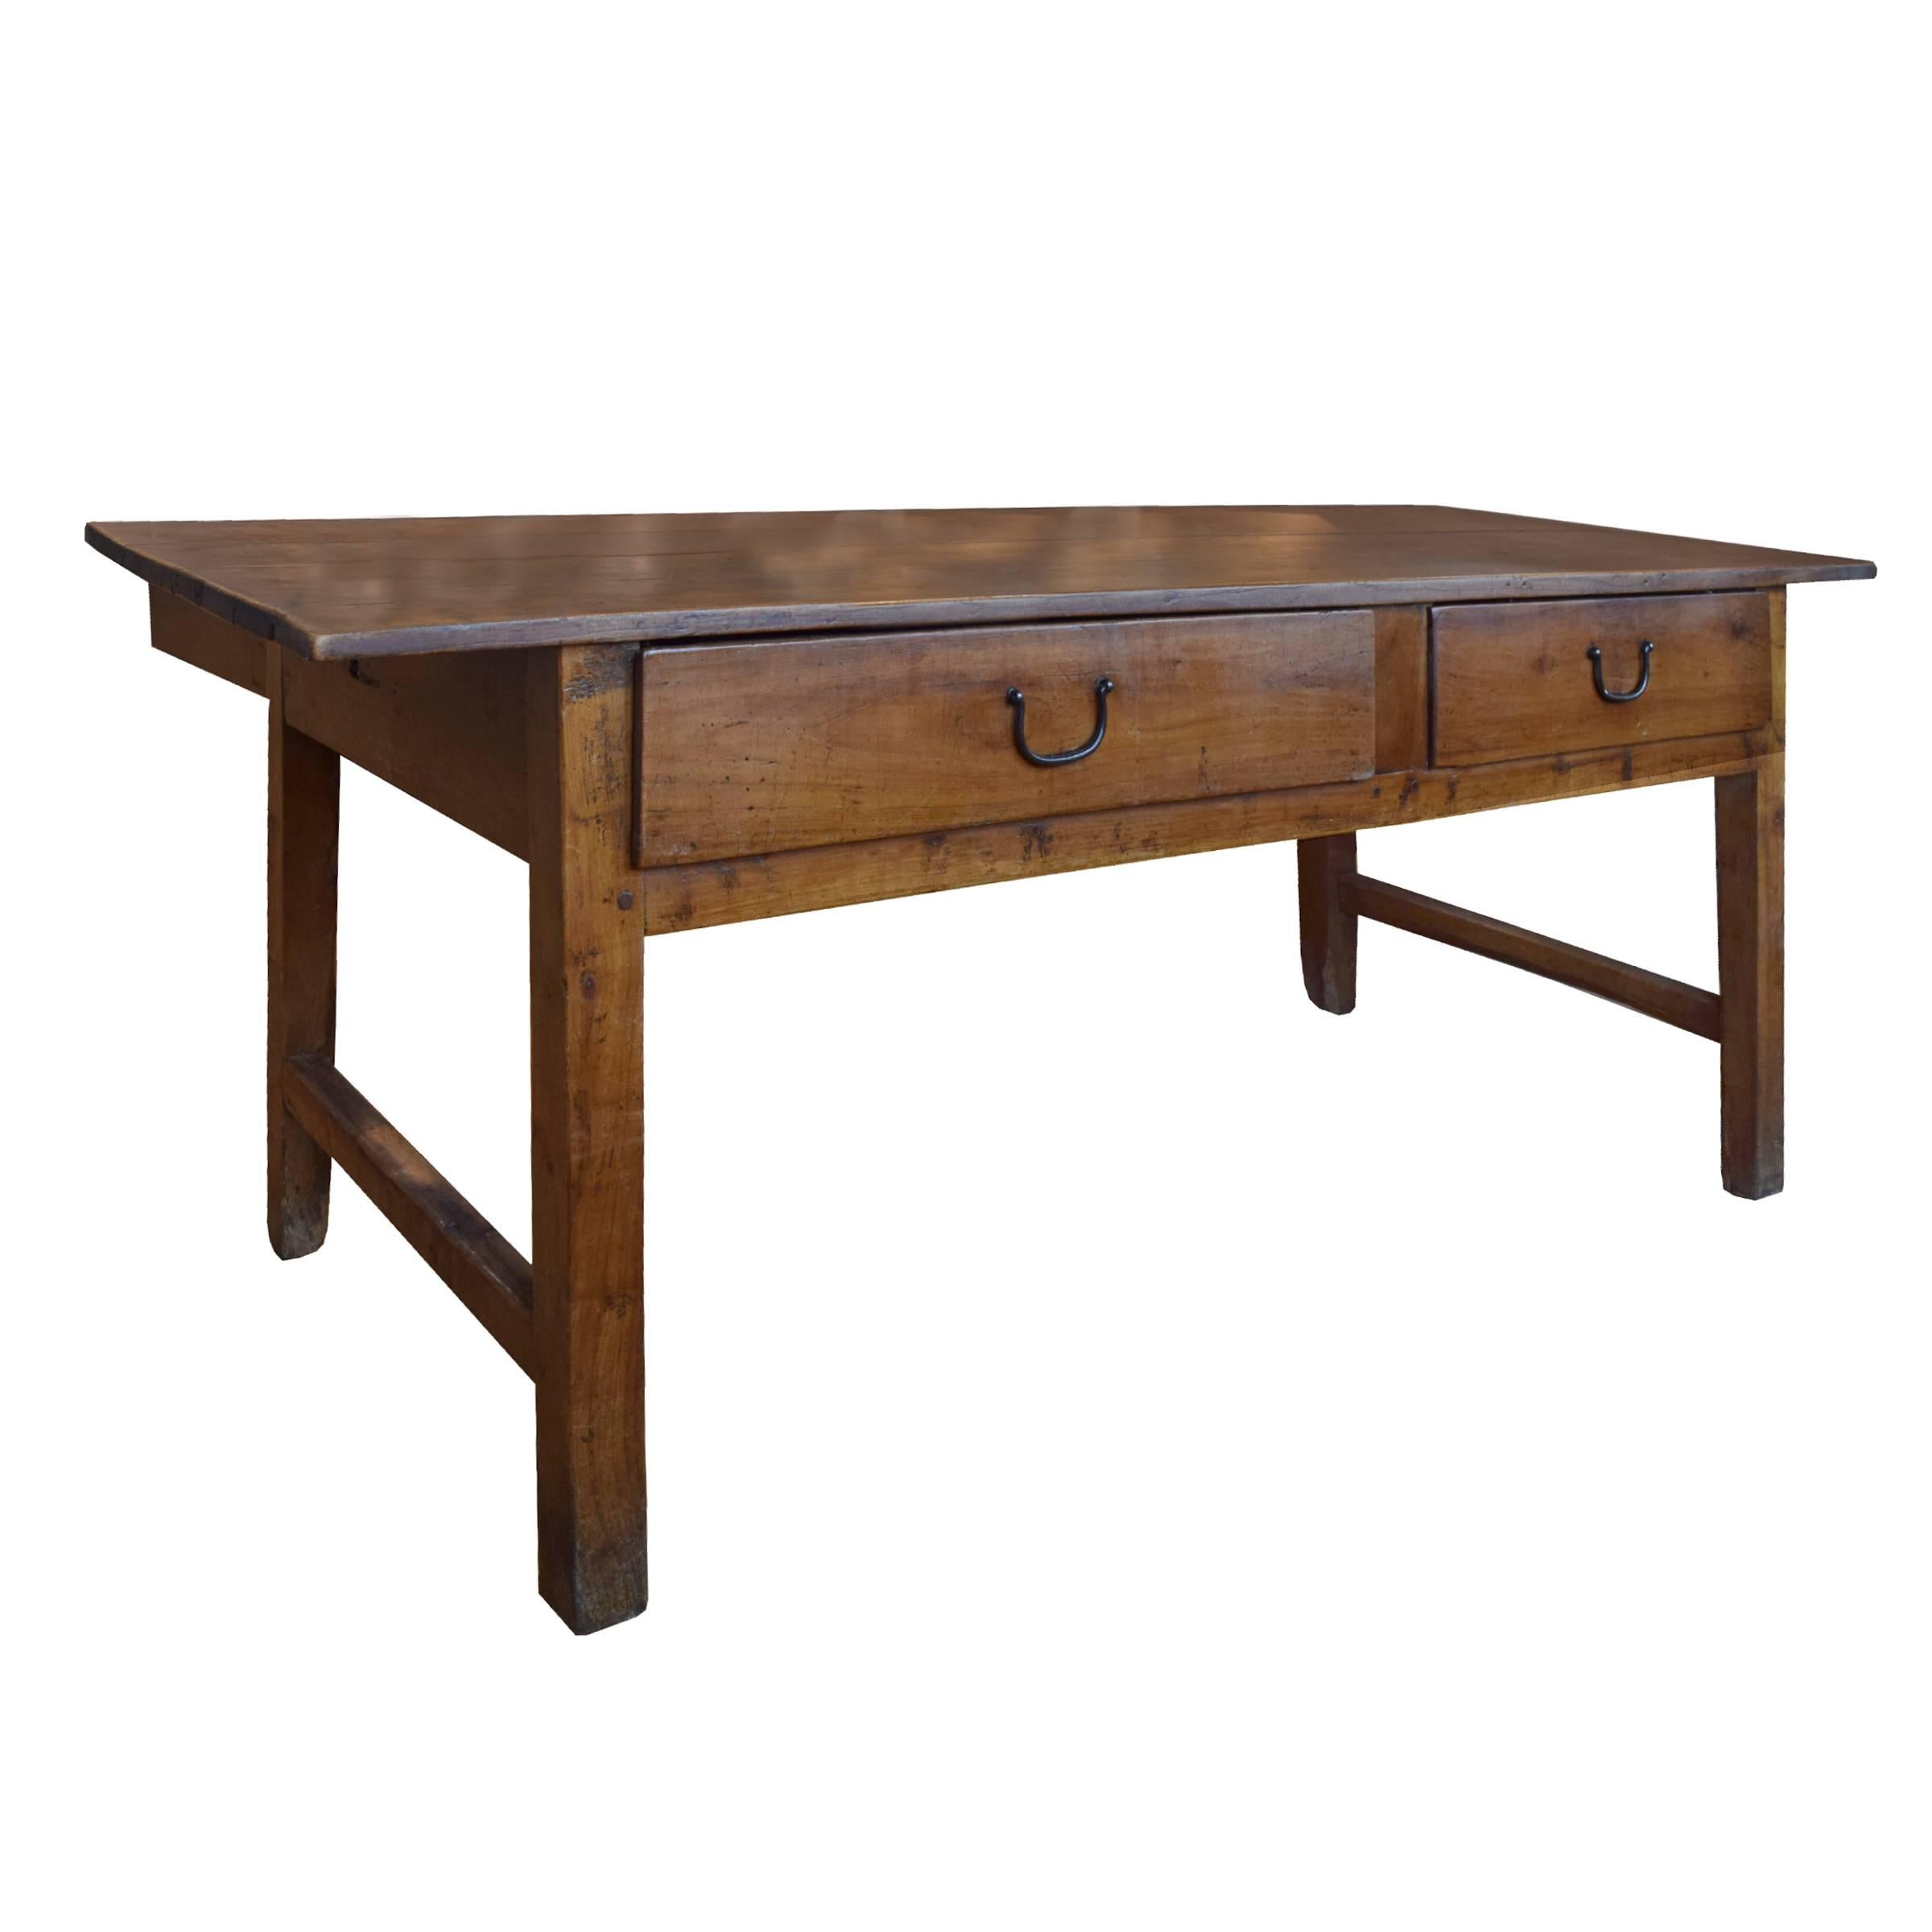 A great French walnut baker's table with two drawers and four legs with stretchers, circa 1900.